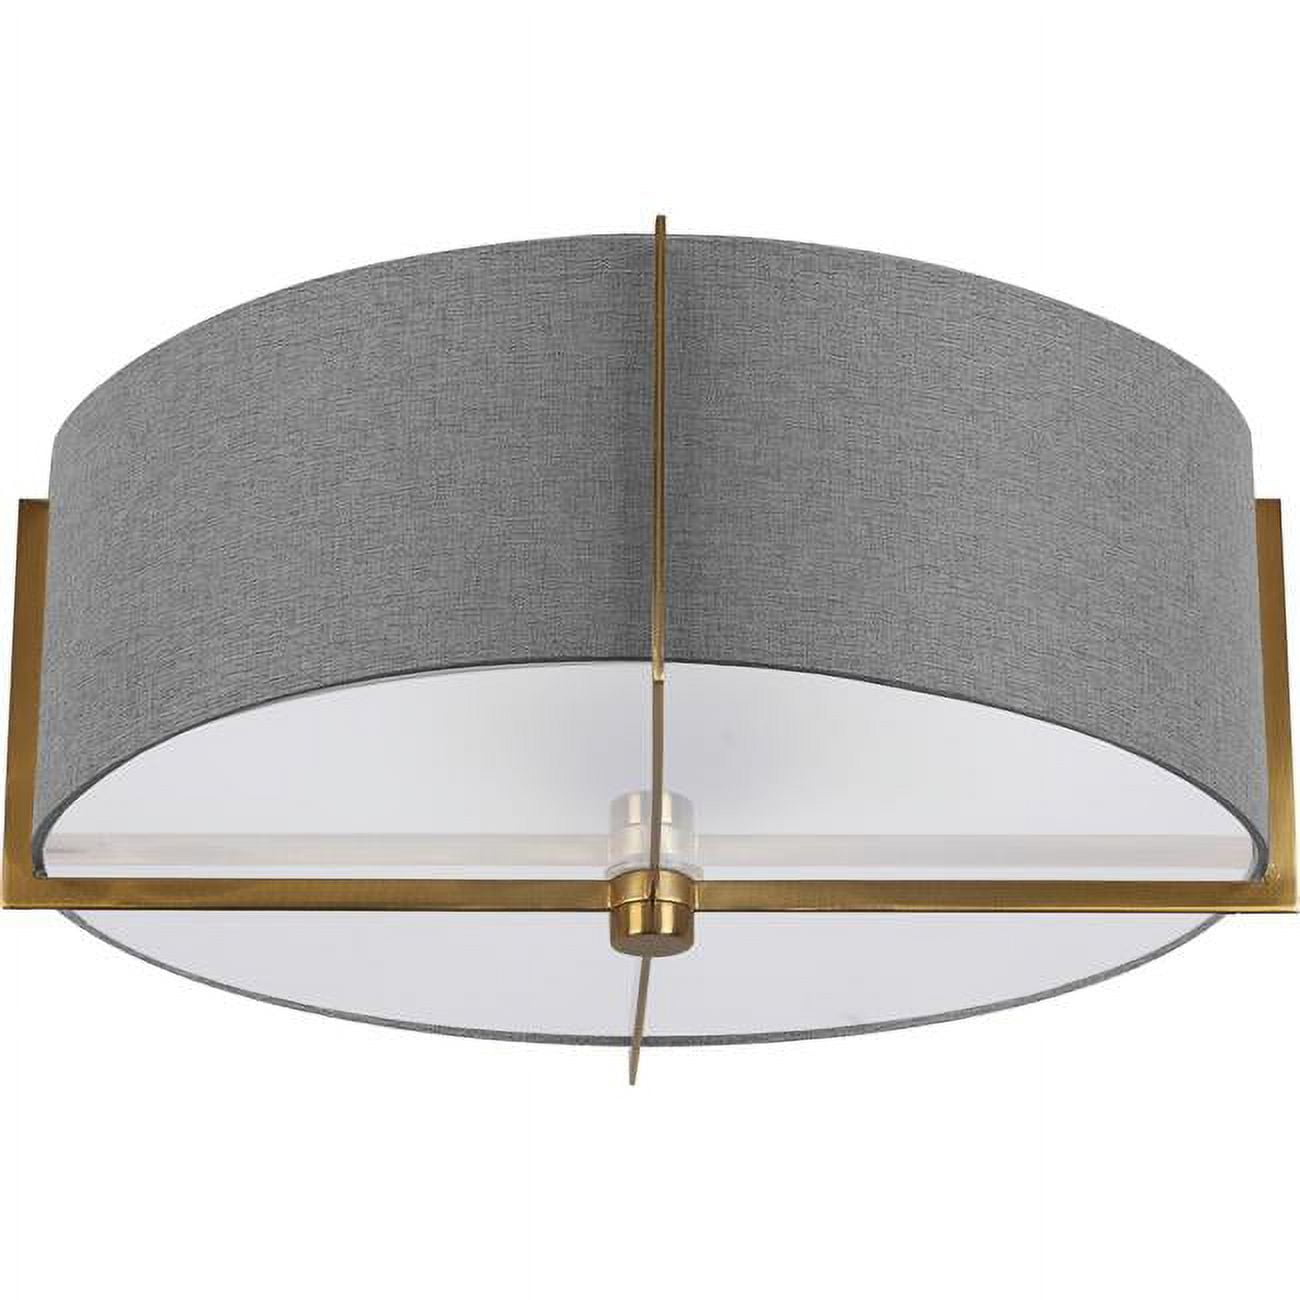 Picture of Dainolite PST-153SF-AGB-GRY 15 in. Preston 3 Light Incandescent Semi-Flush Mount, Aged Brass with Gray Shade